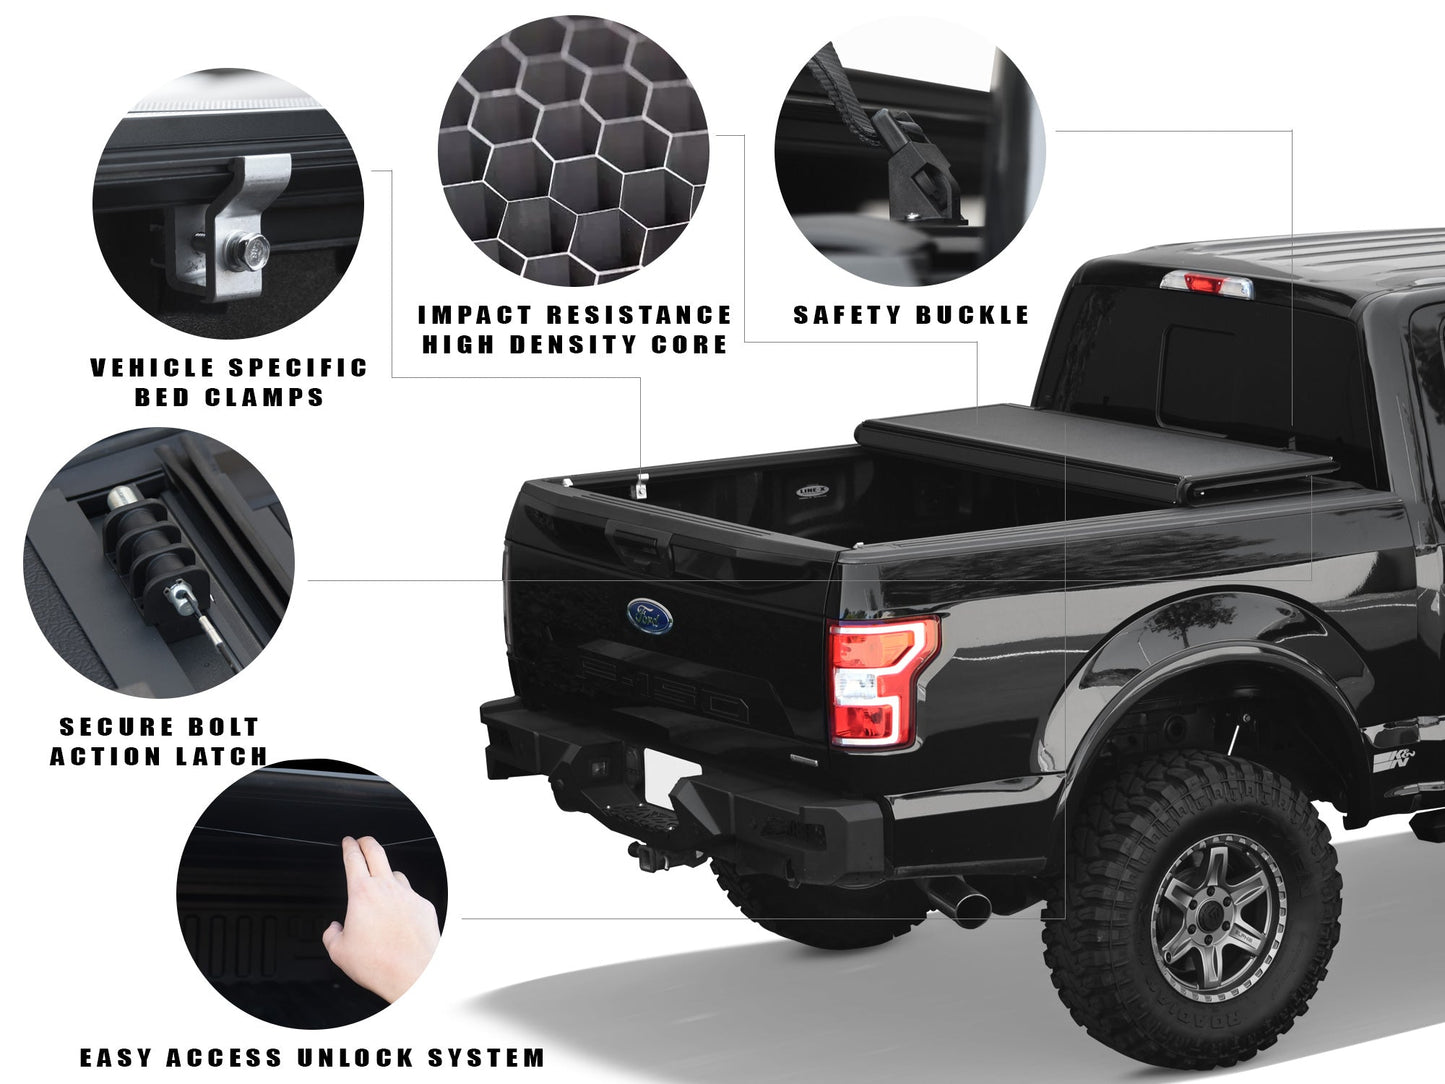 Armordillo 2005-2021 Nissan Frontier CoveRex TFX Series Folding Truck Bed Tonneau Cover (6 Ft Bed) - Bayson R Motorsports